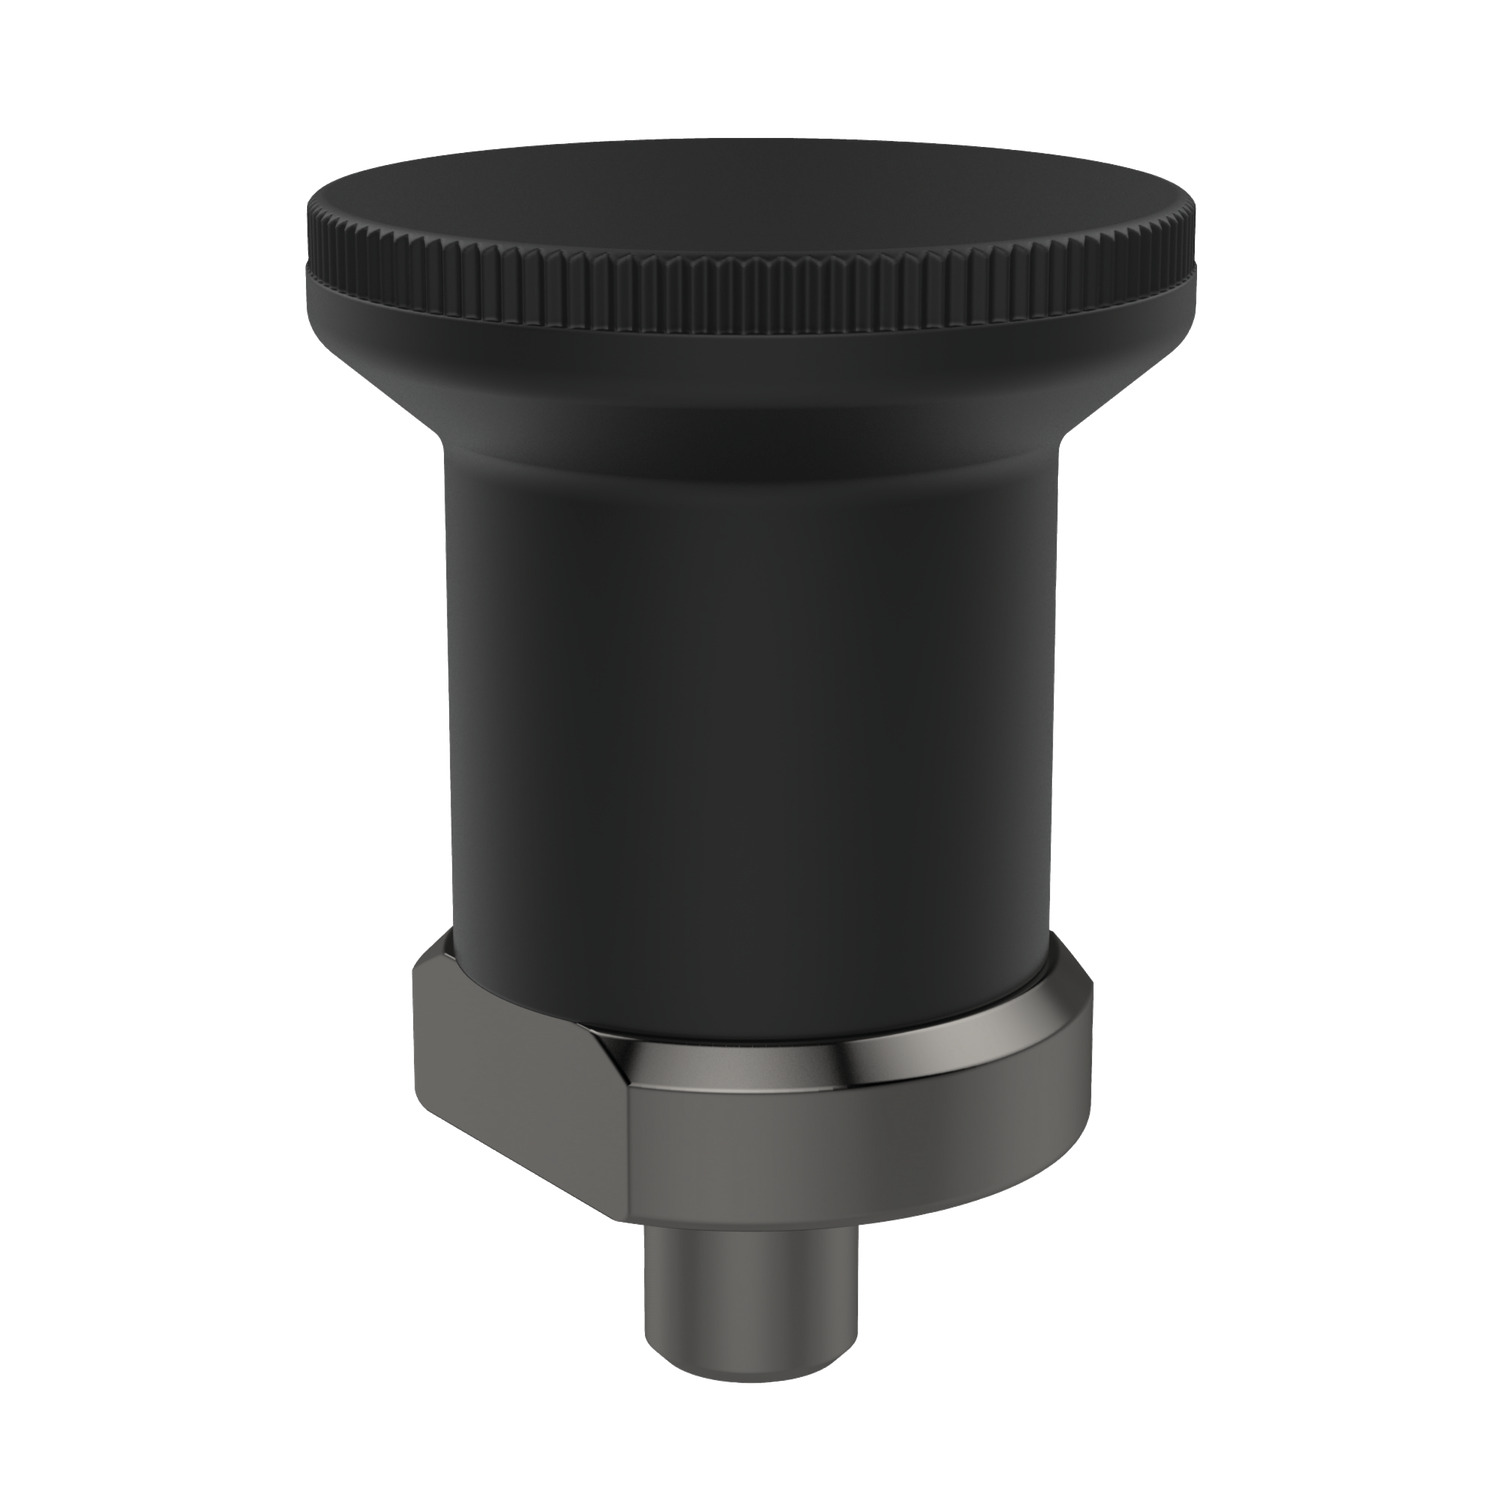 Index Plungers - Pull Grip Pull grip index plunger with flange mounting. Weldable, compact. Available in locking and non-locking type.